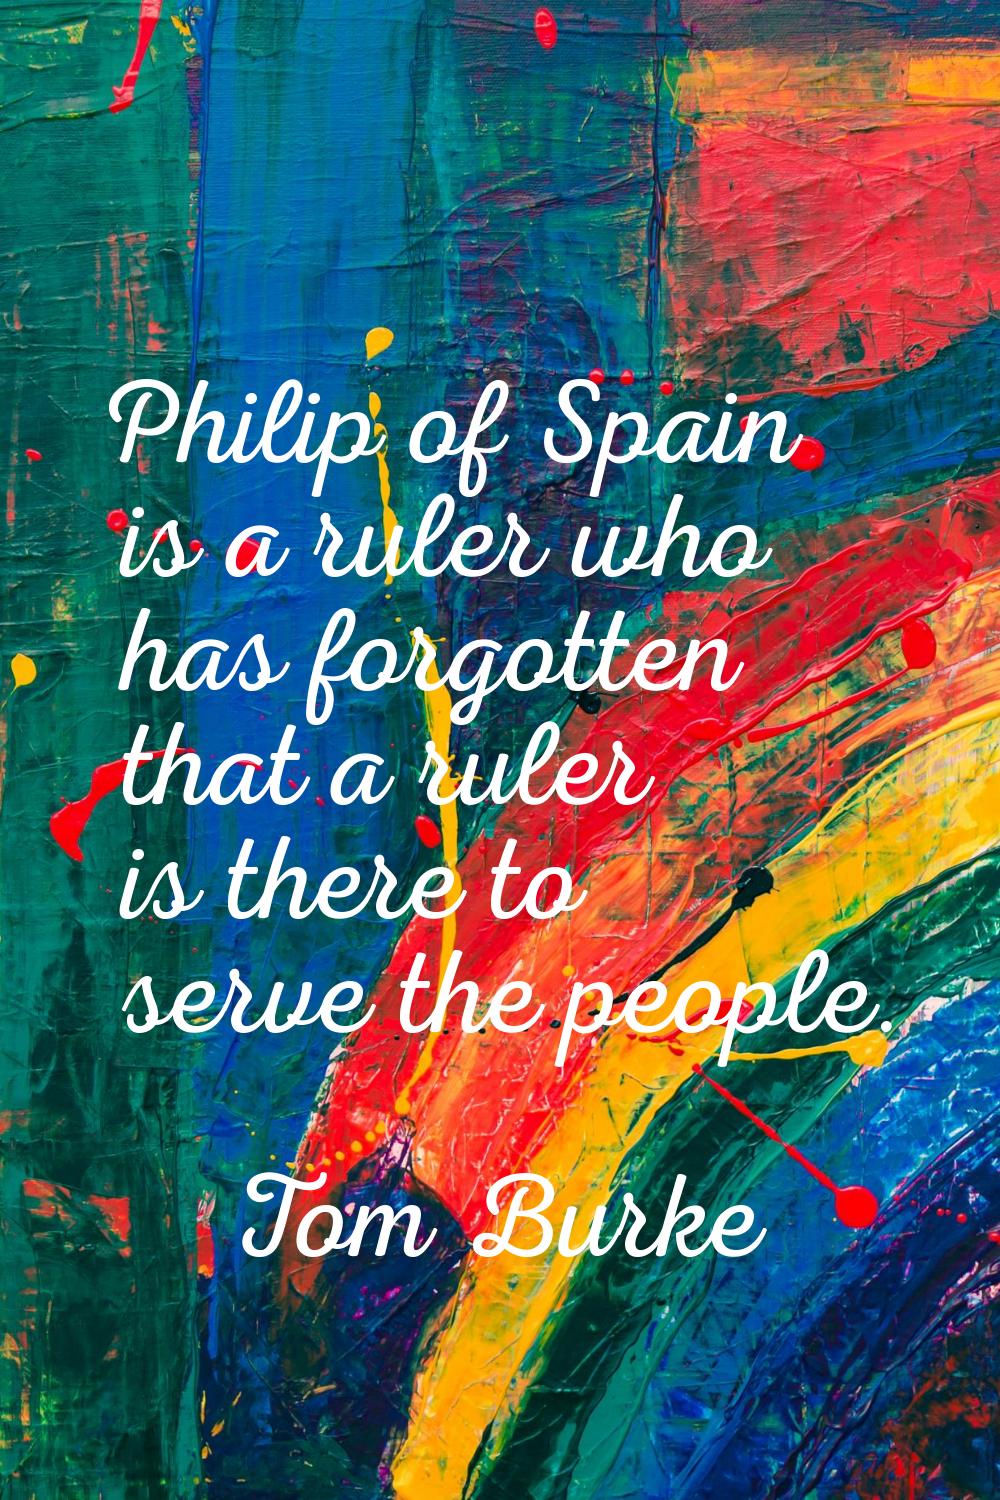 Philip of Spain is a ruler who has forgotten that a ruler is there to serve the people.